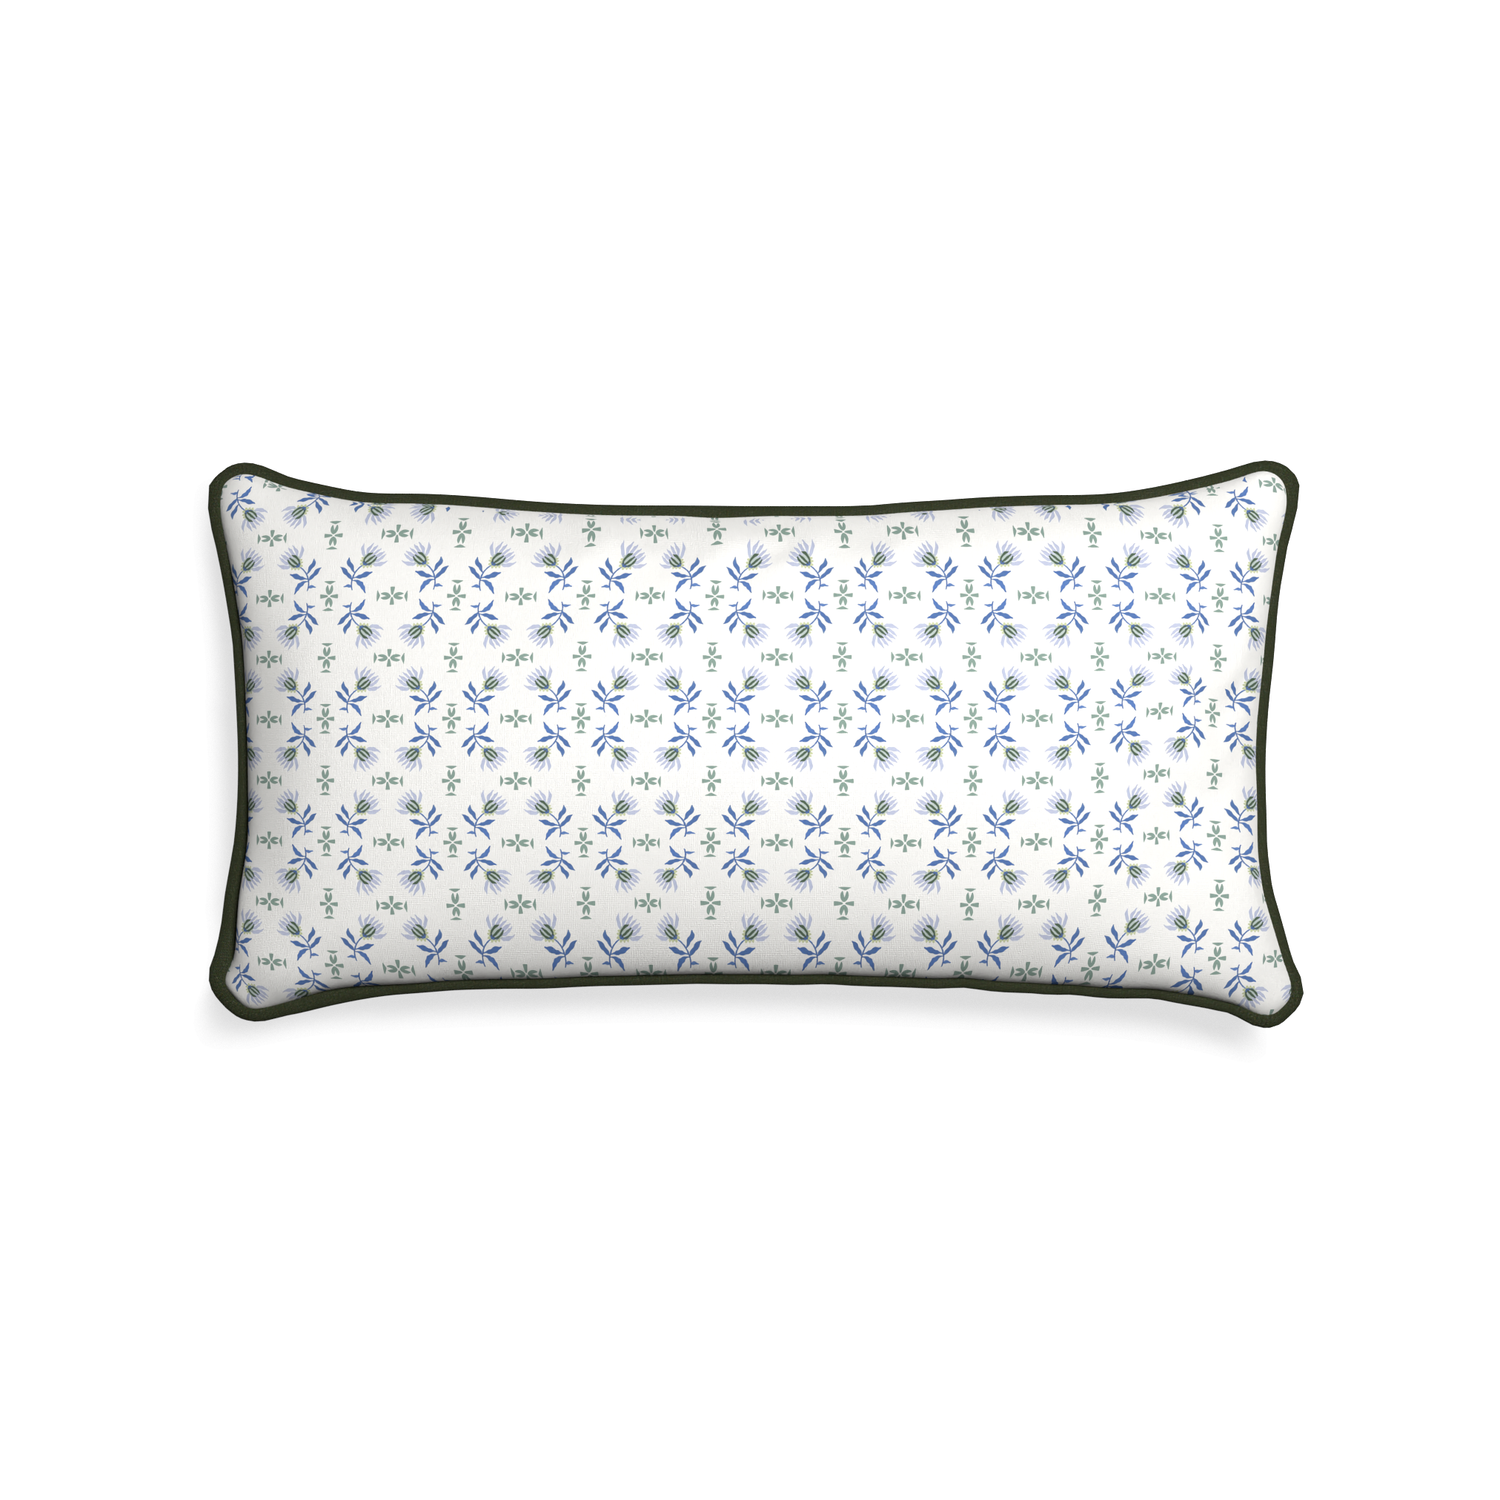 Midi-lumbar lee custom blue & green floralpillow with f piping on white background